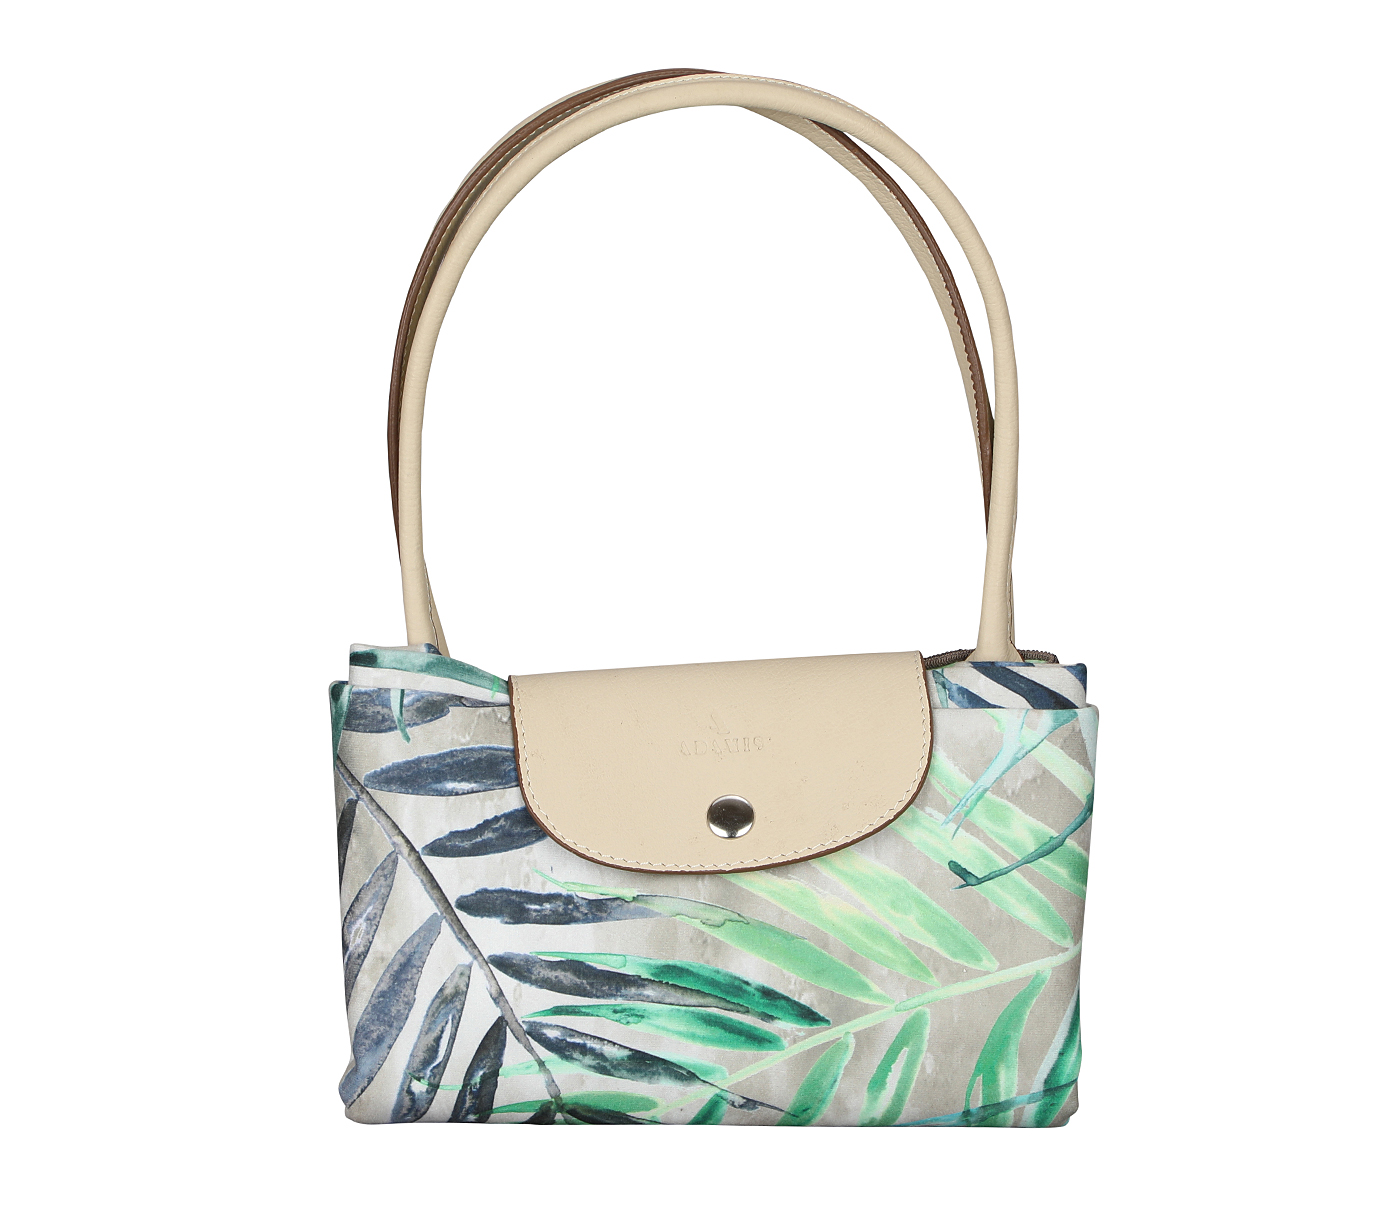 B882--Adelina Folding Tote Bag In Leaf Print Material With Genuine Leather Handles And Flap - Green